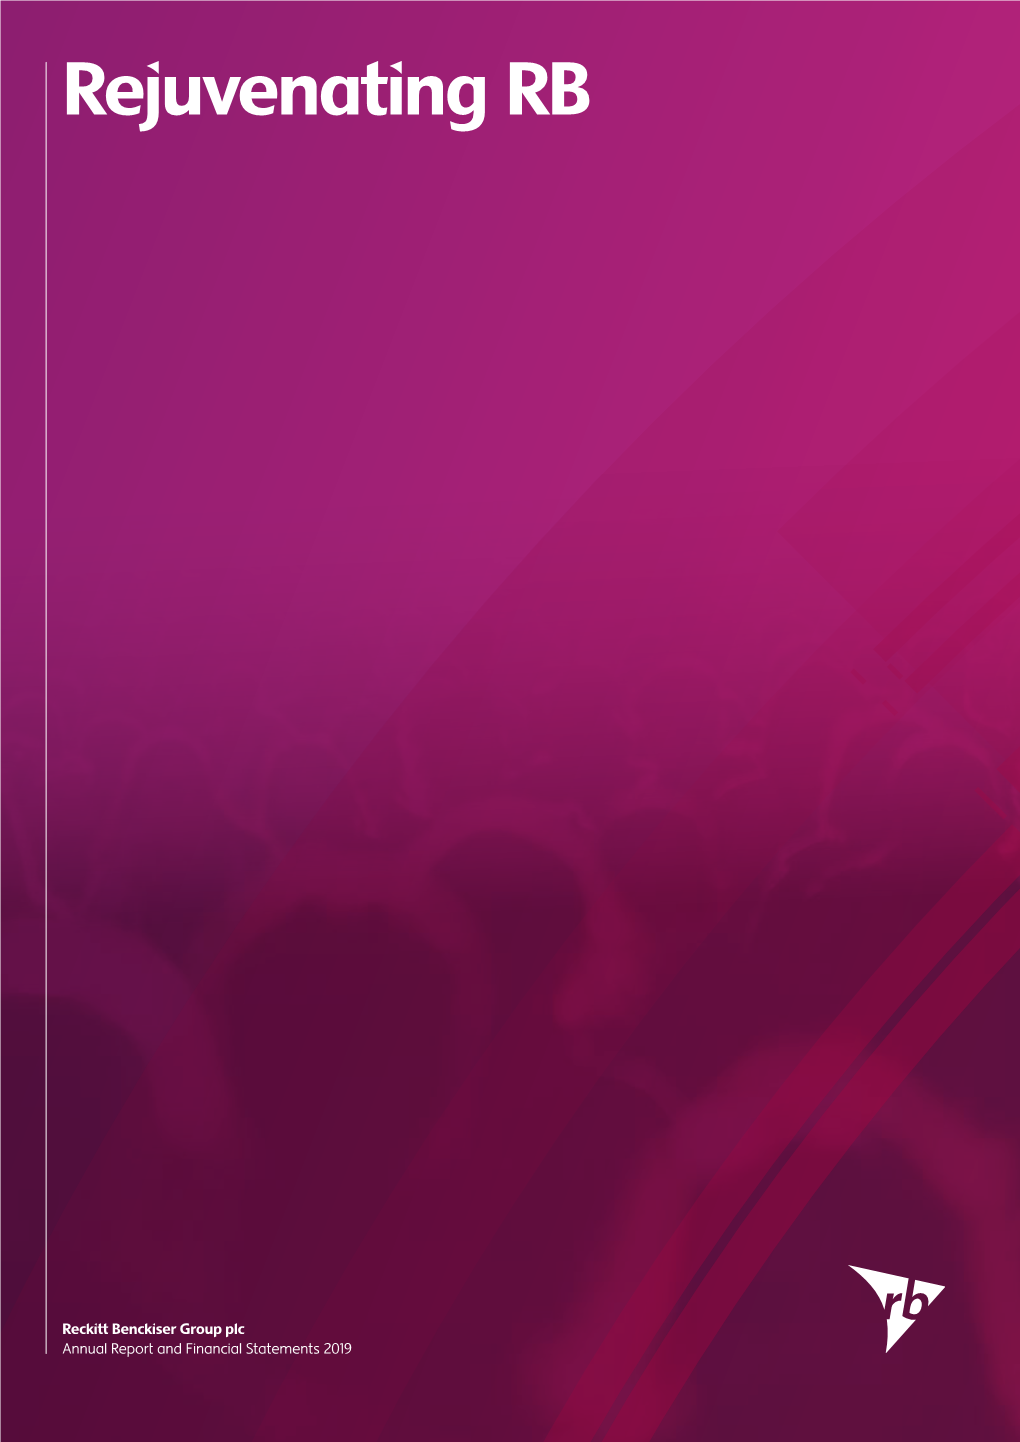 Rejuvenating RB Plc Group Benckiser Reckitt Annual Report and Financial Statements 2019 Statements Financial and Report Annual